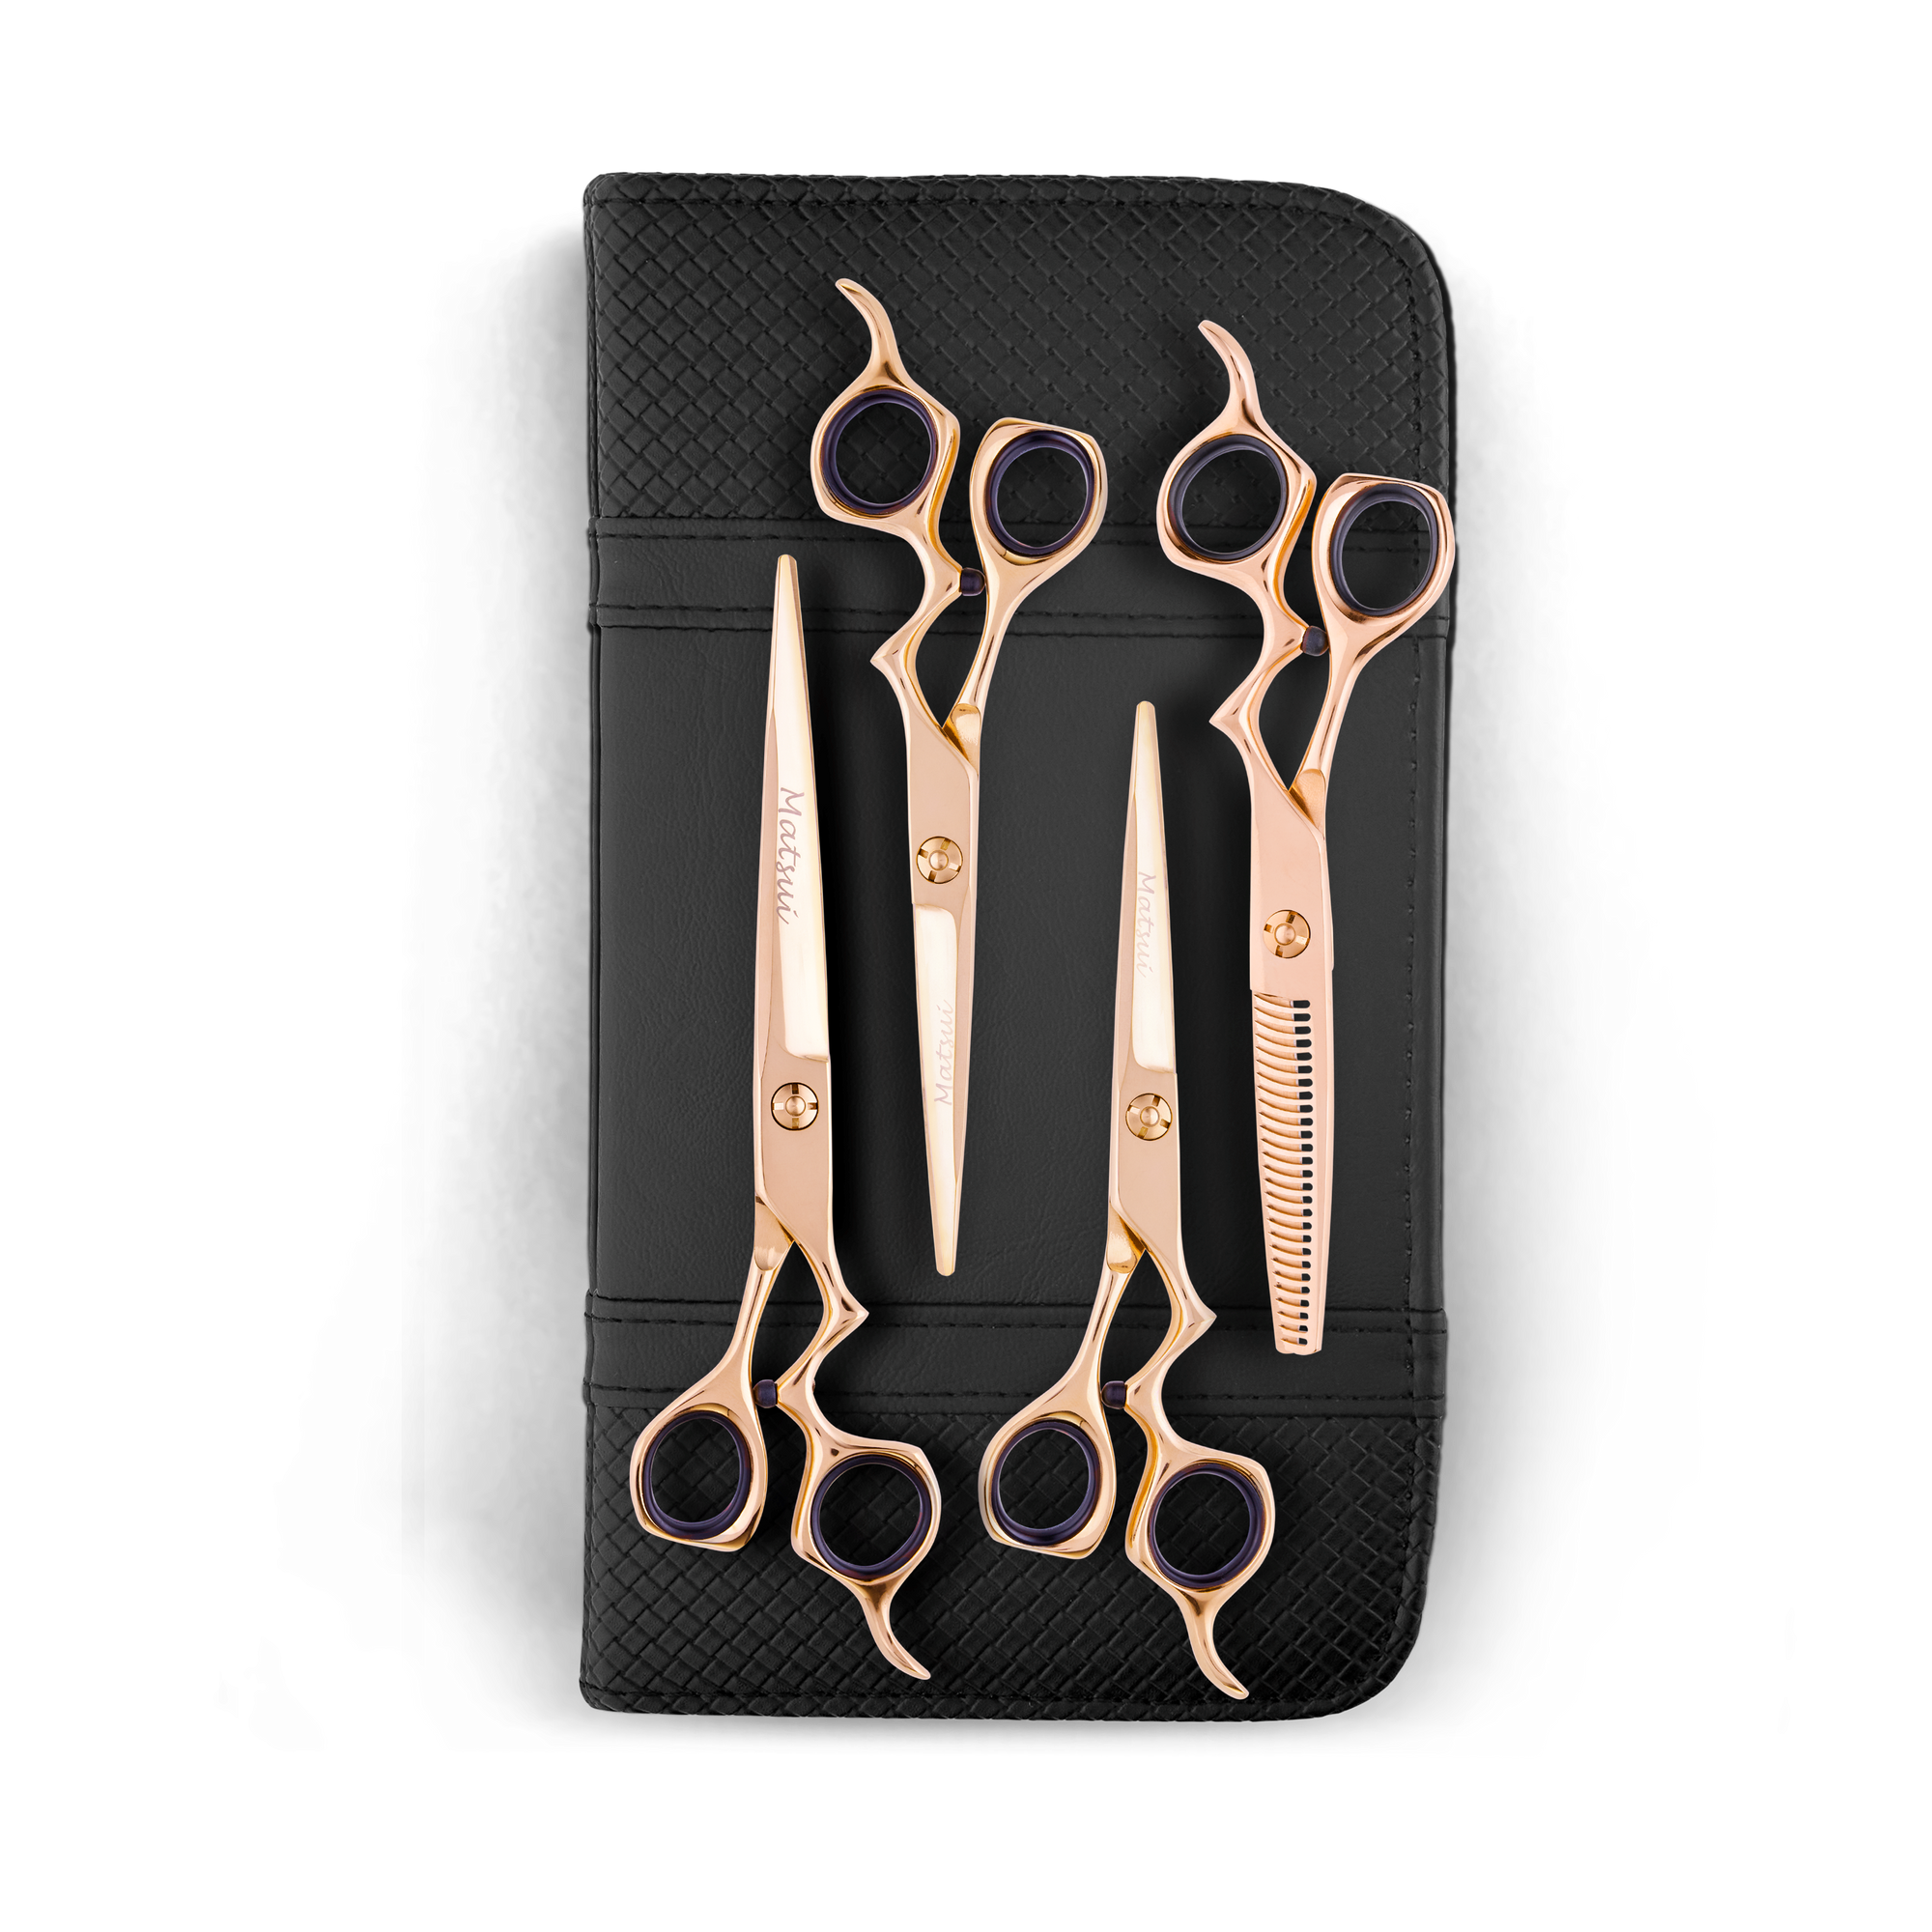 Matsui Classic Ergo Support Ultimate Barber Combo Rose Gold (4set)